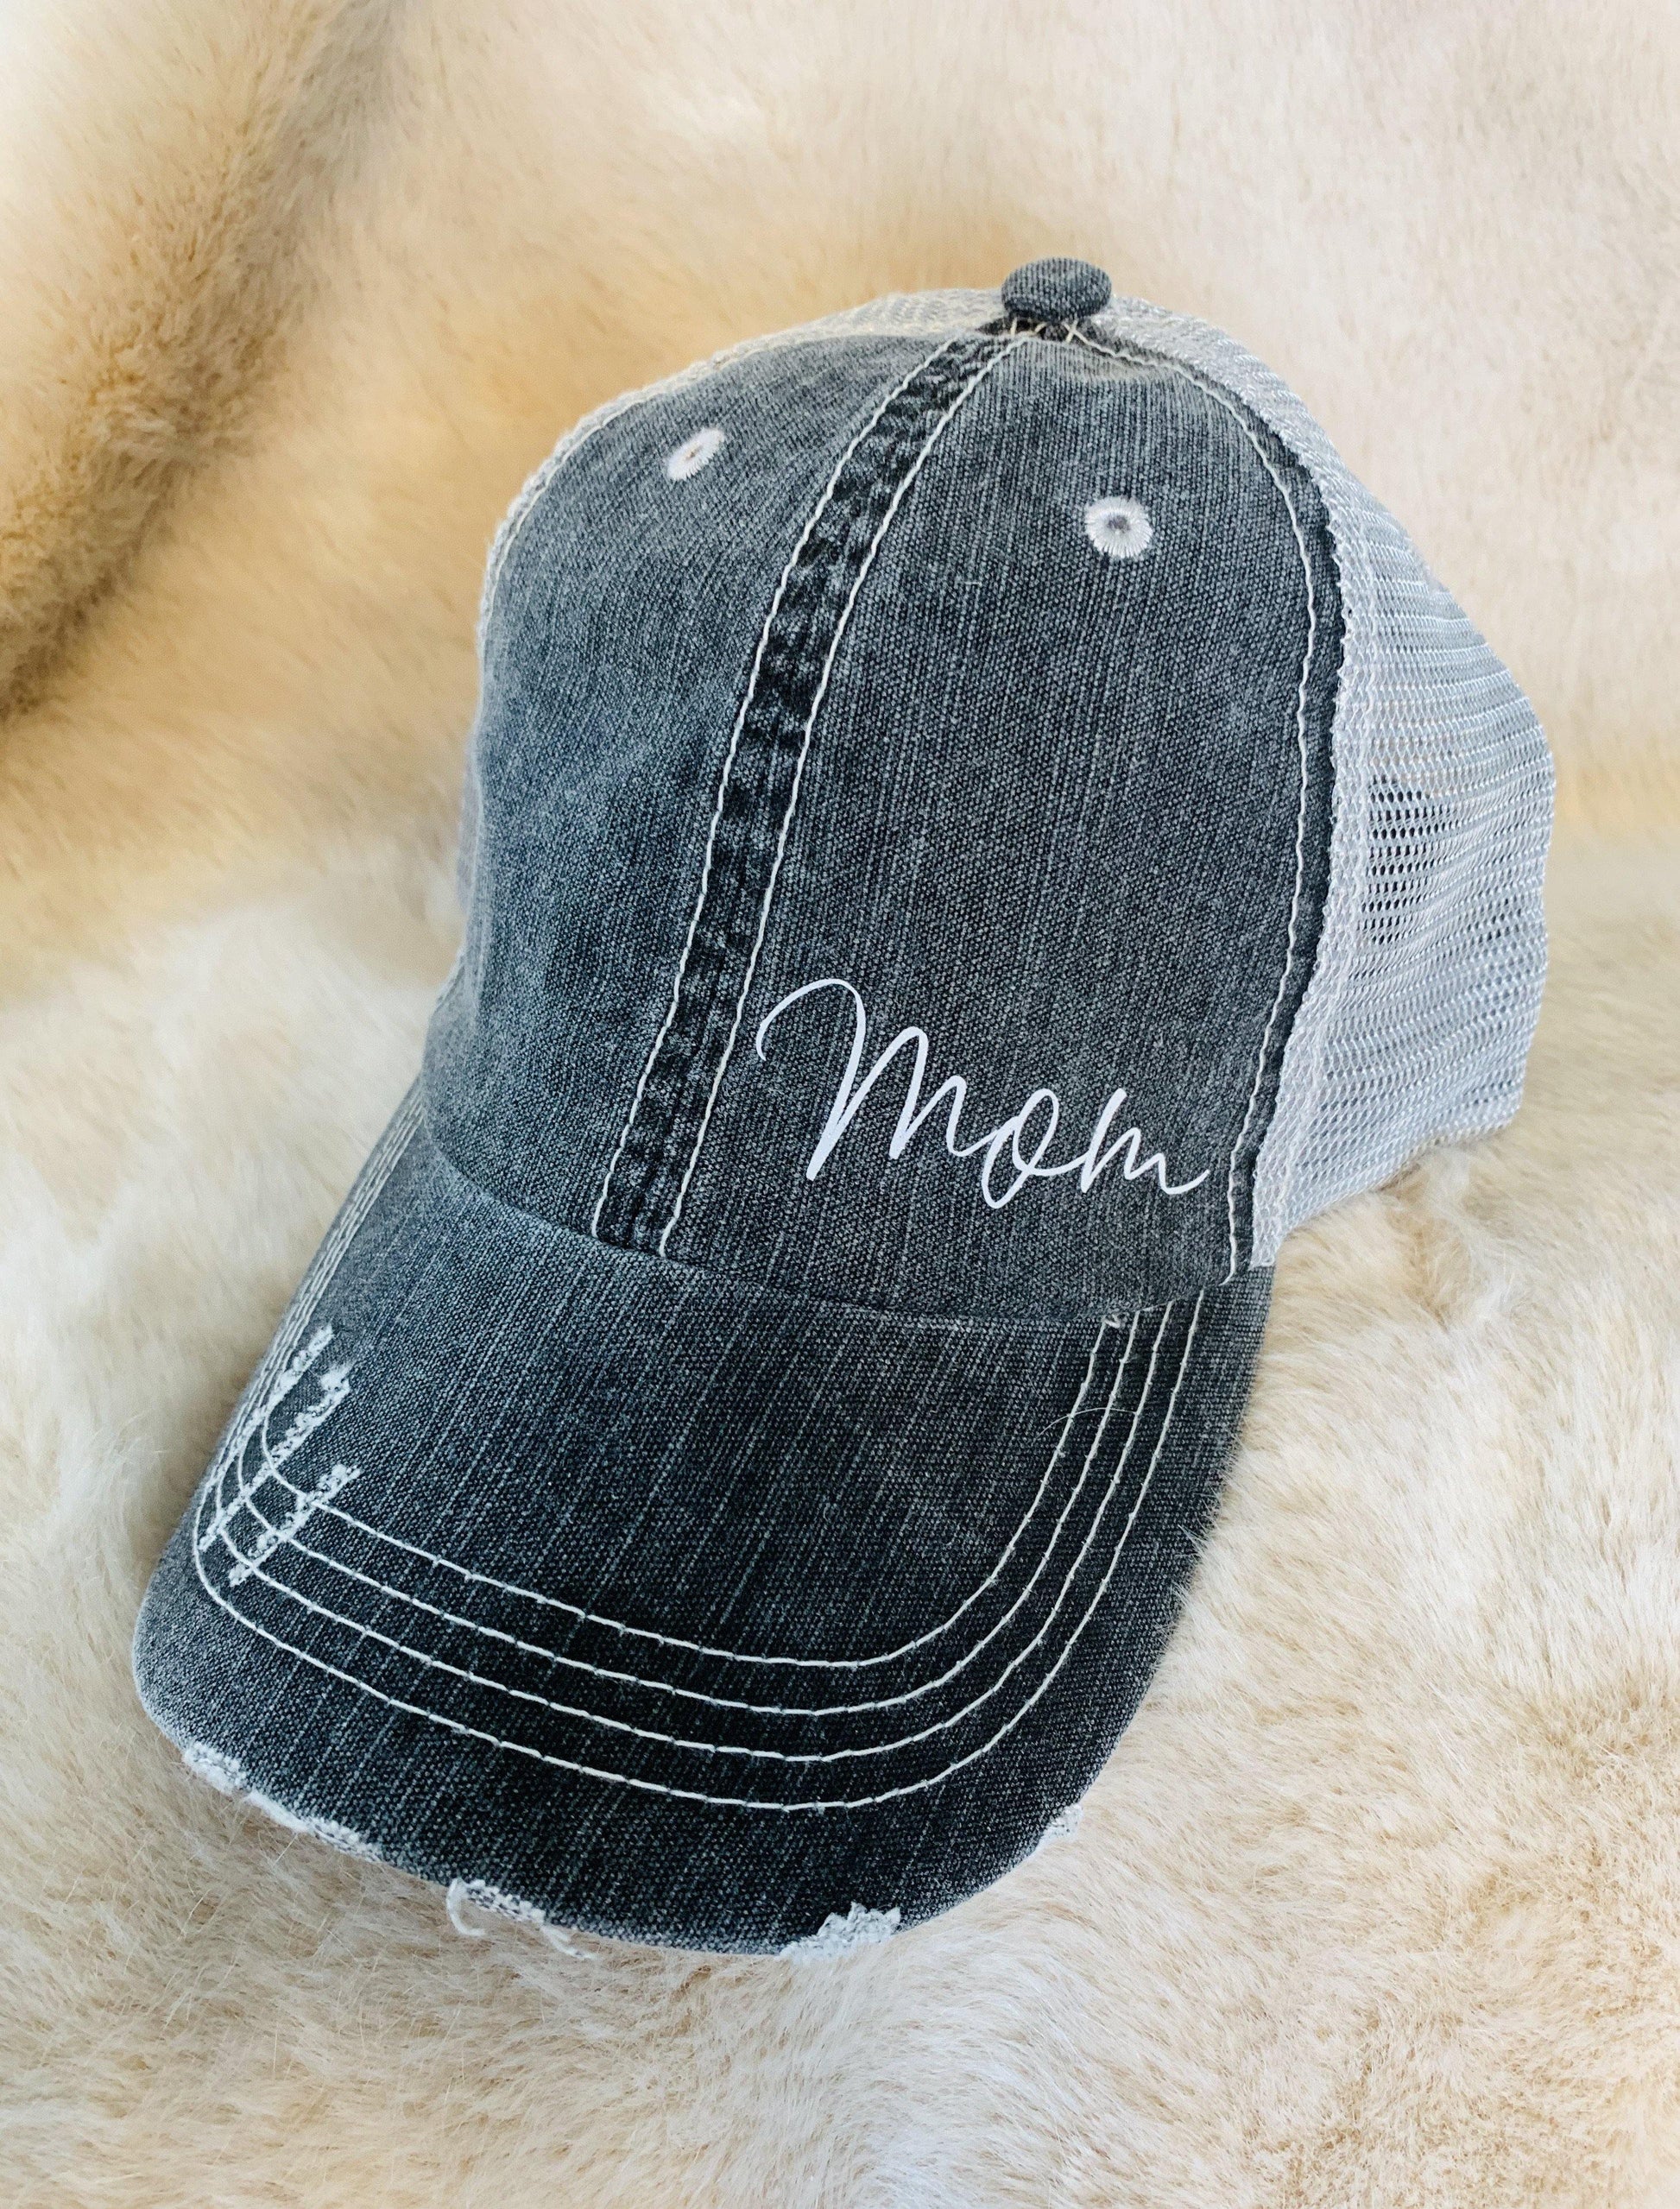 Hats { Mom } Gray distressed trucker cap. 💗 Custom words welcome! Mama, dog mom, baseball mom, lake girl, girl boss. Anything! - Stacy's Pink Martini Boutique